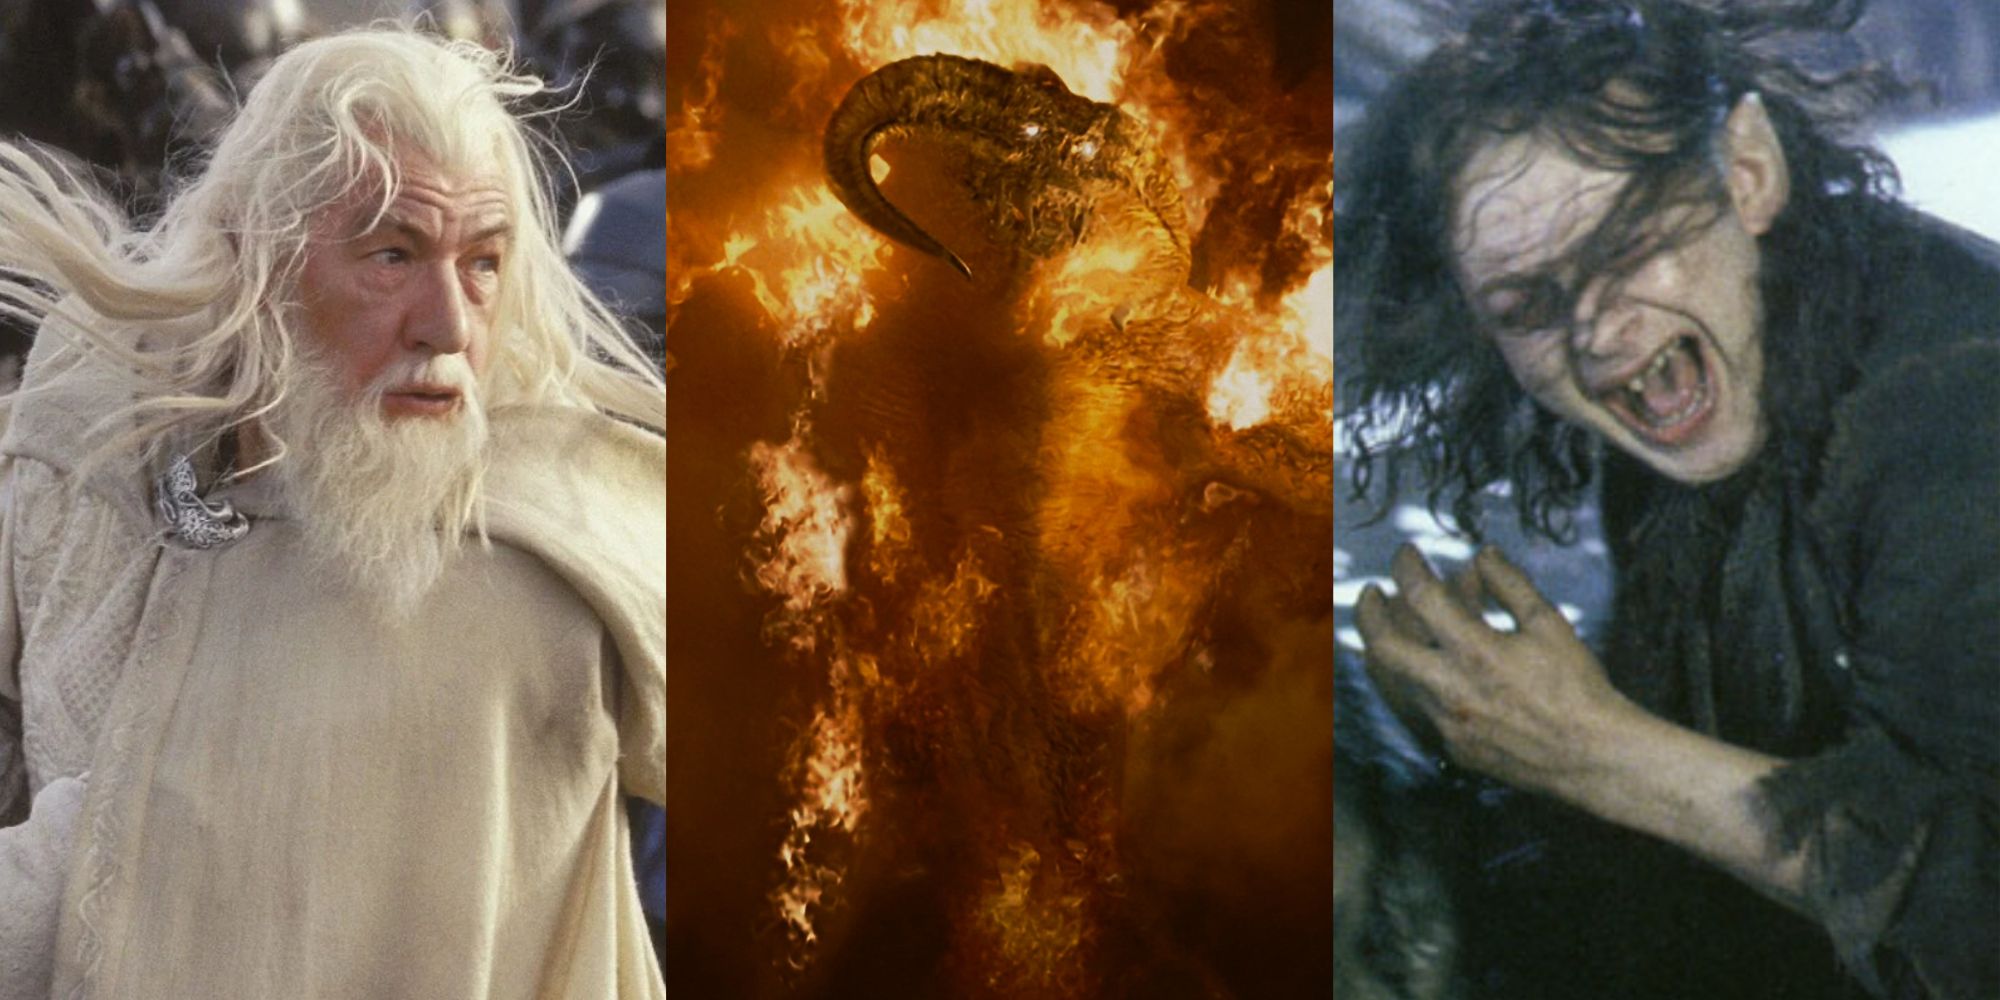 Split image of Gandalf, the Balrog and Smeagol from the Lord of the Rings movies